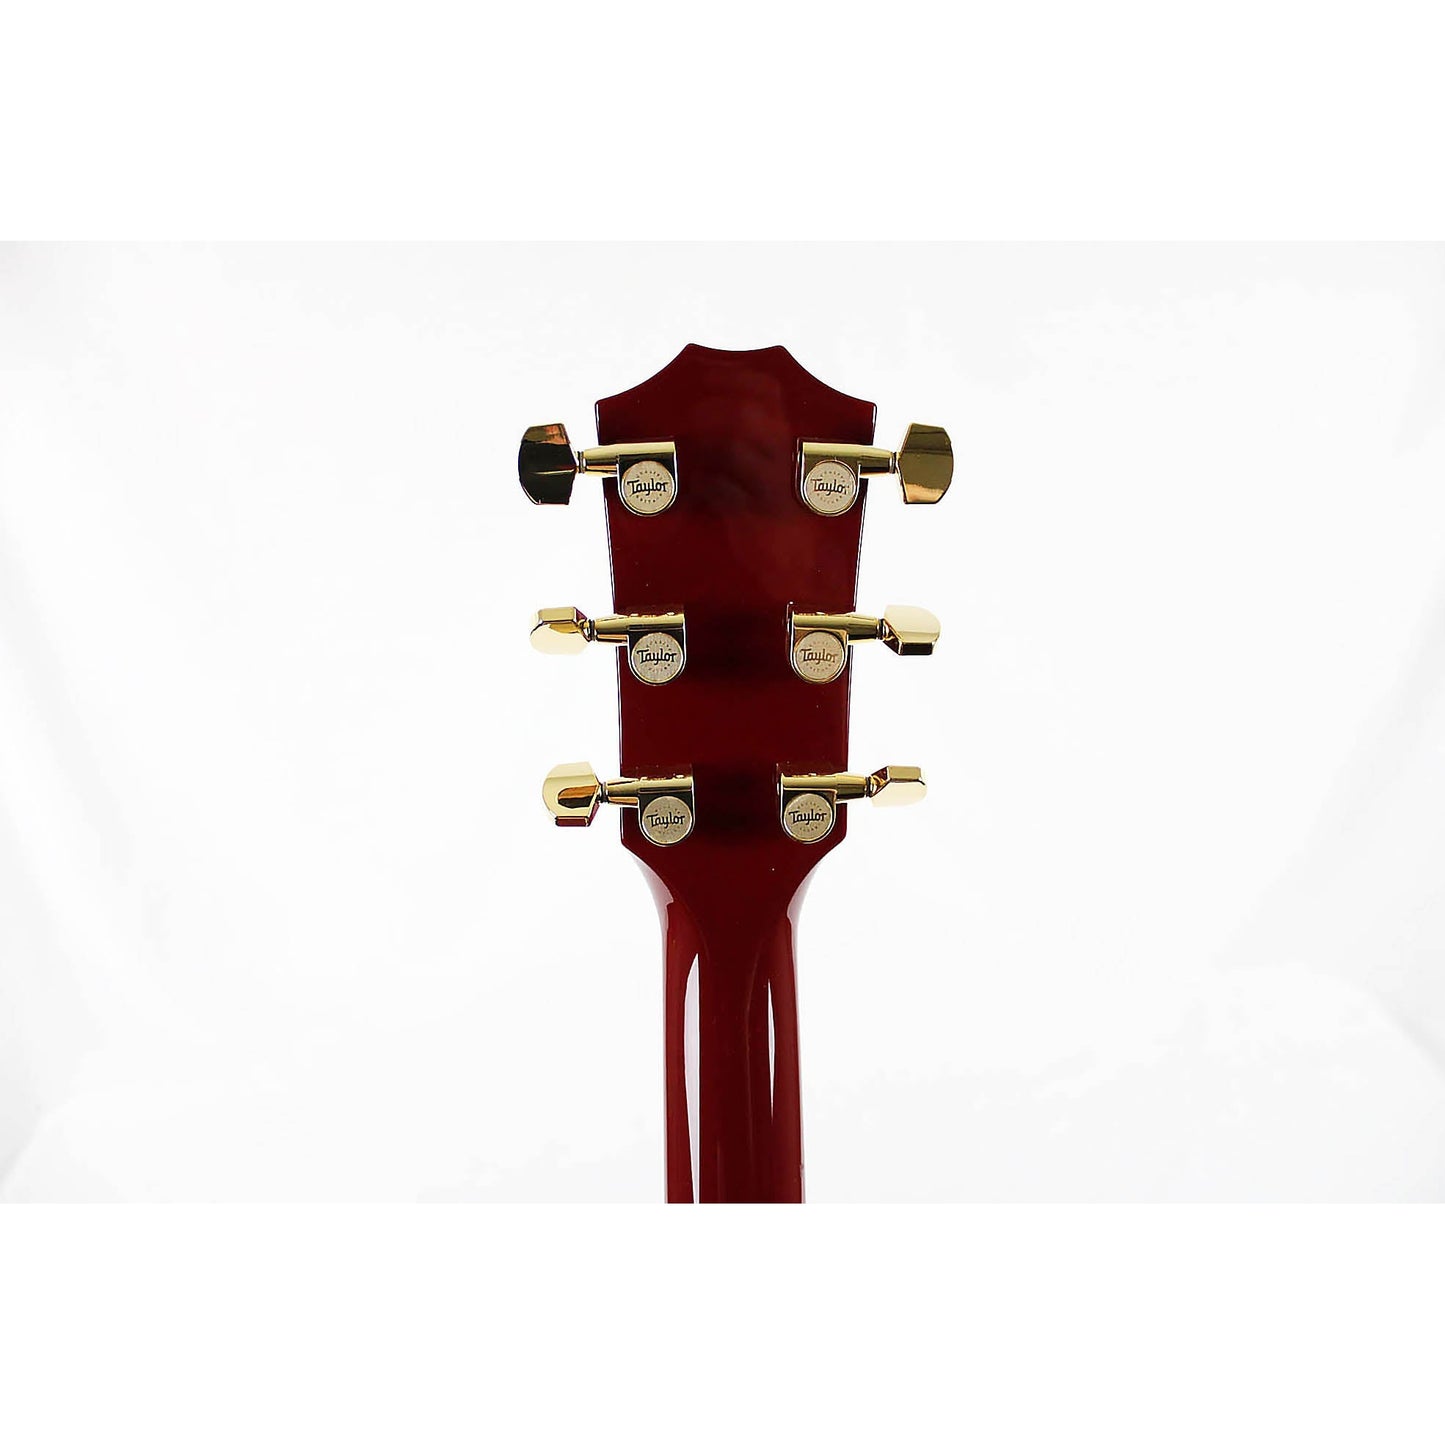 Taylor 214ce Deluxe - Red - Leitz Music--214CEREDDLX